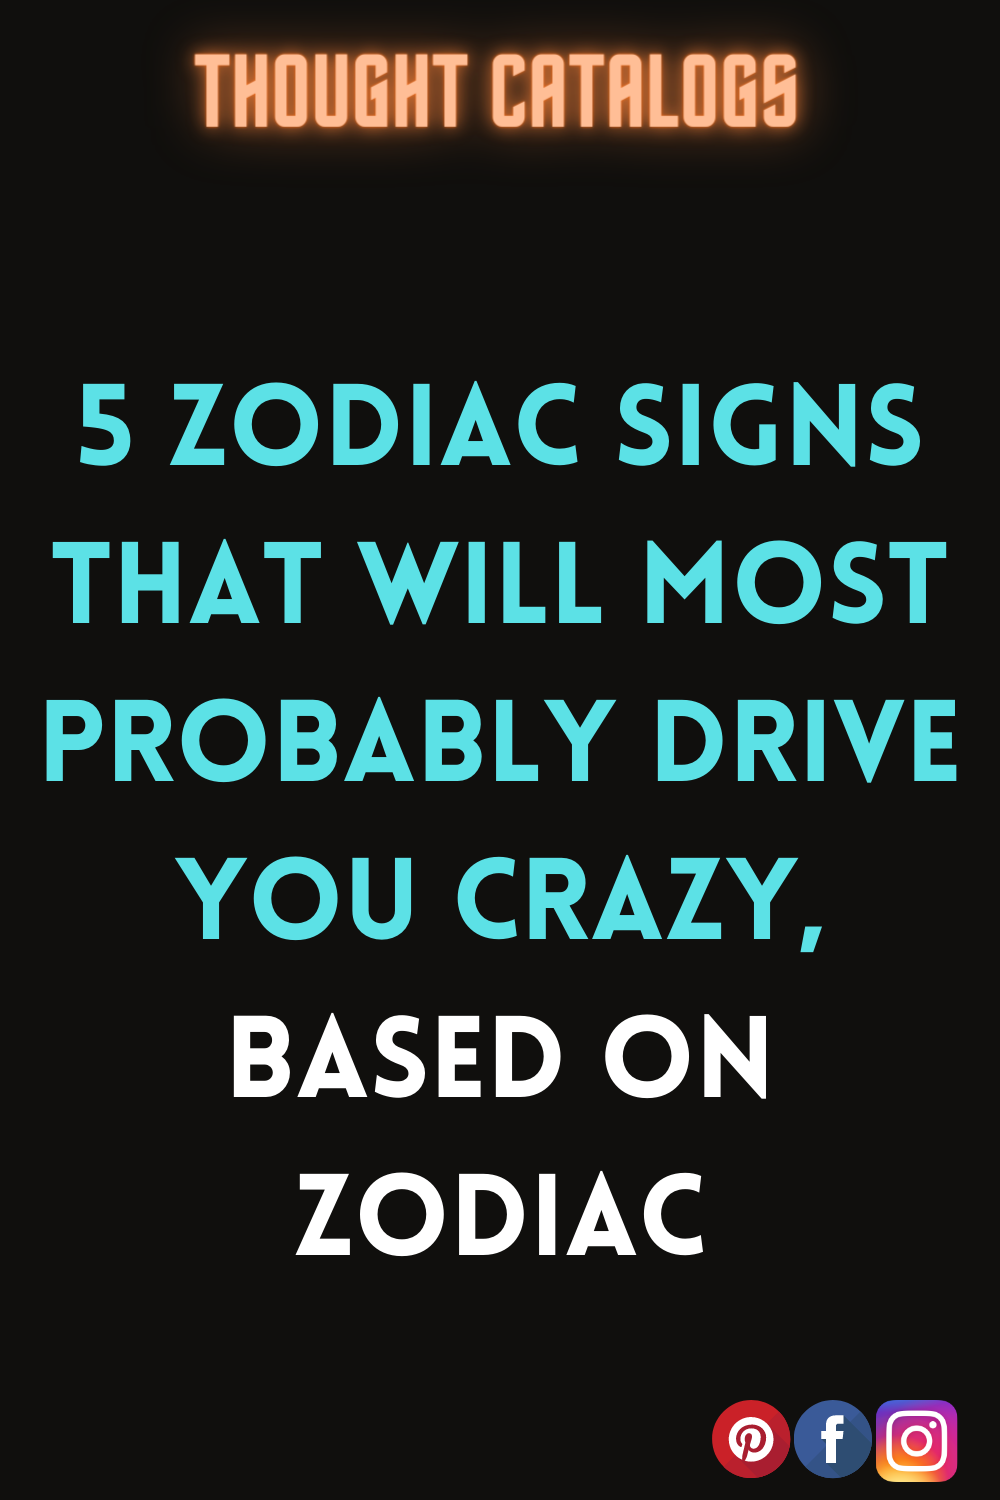 5 Zodiac Signs That Will Most Probably Drive You Crazy, Based On Zodiac